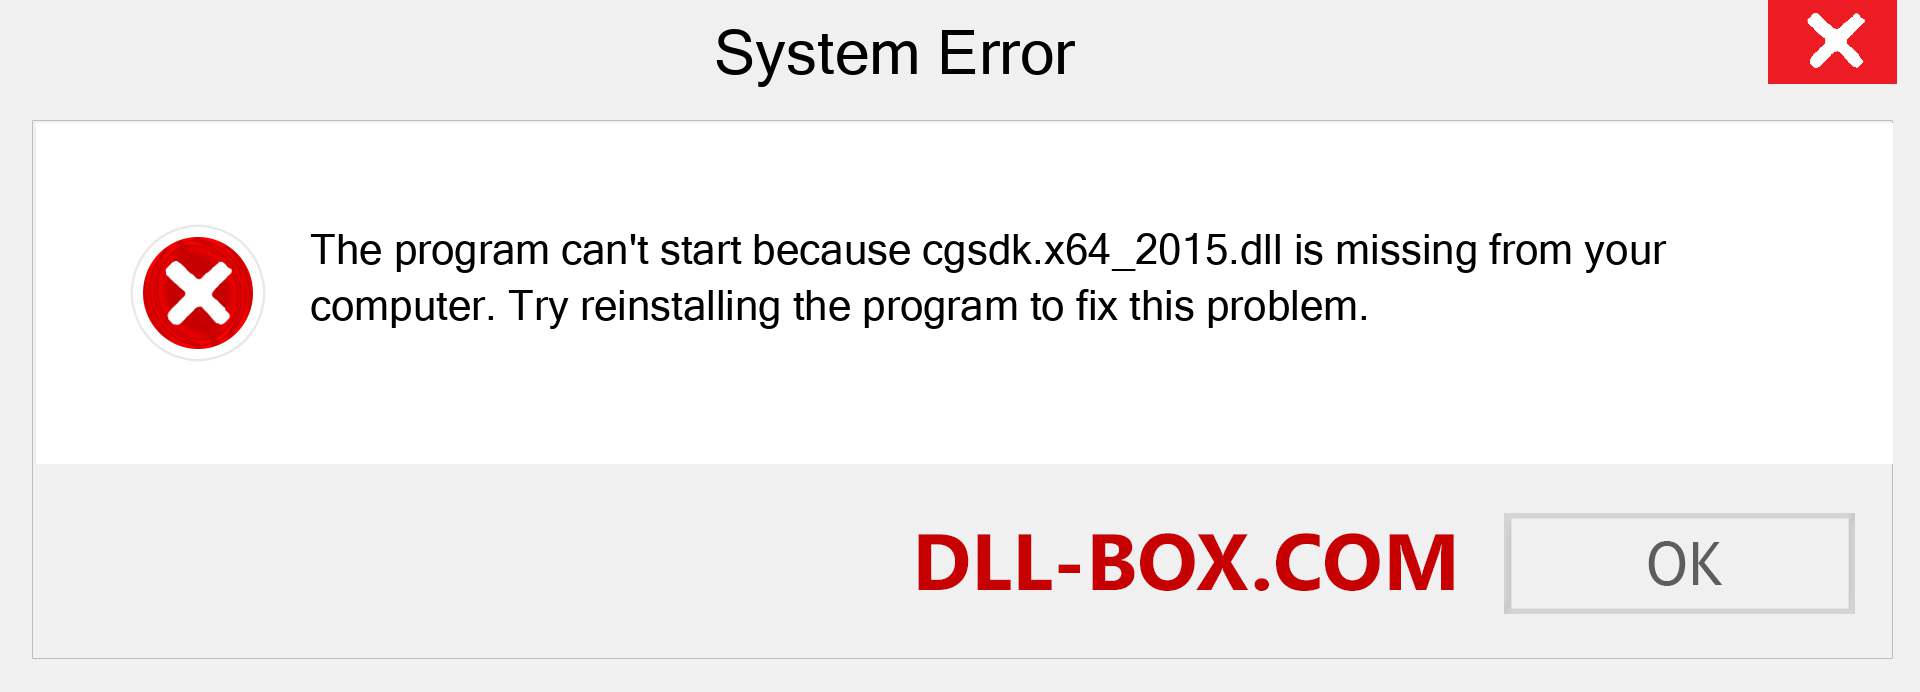  cgsdk.x64_2015.dll file is missing?. Download for Windows 7, 8, 10 - Fix  cgsdk.x64_2015 dll Missing Error on Windows, photos, images